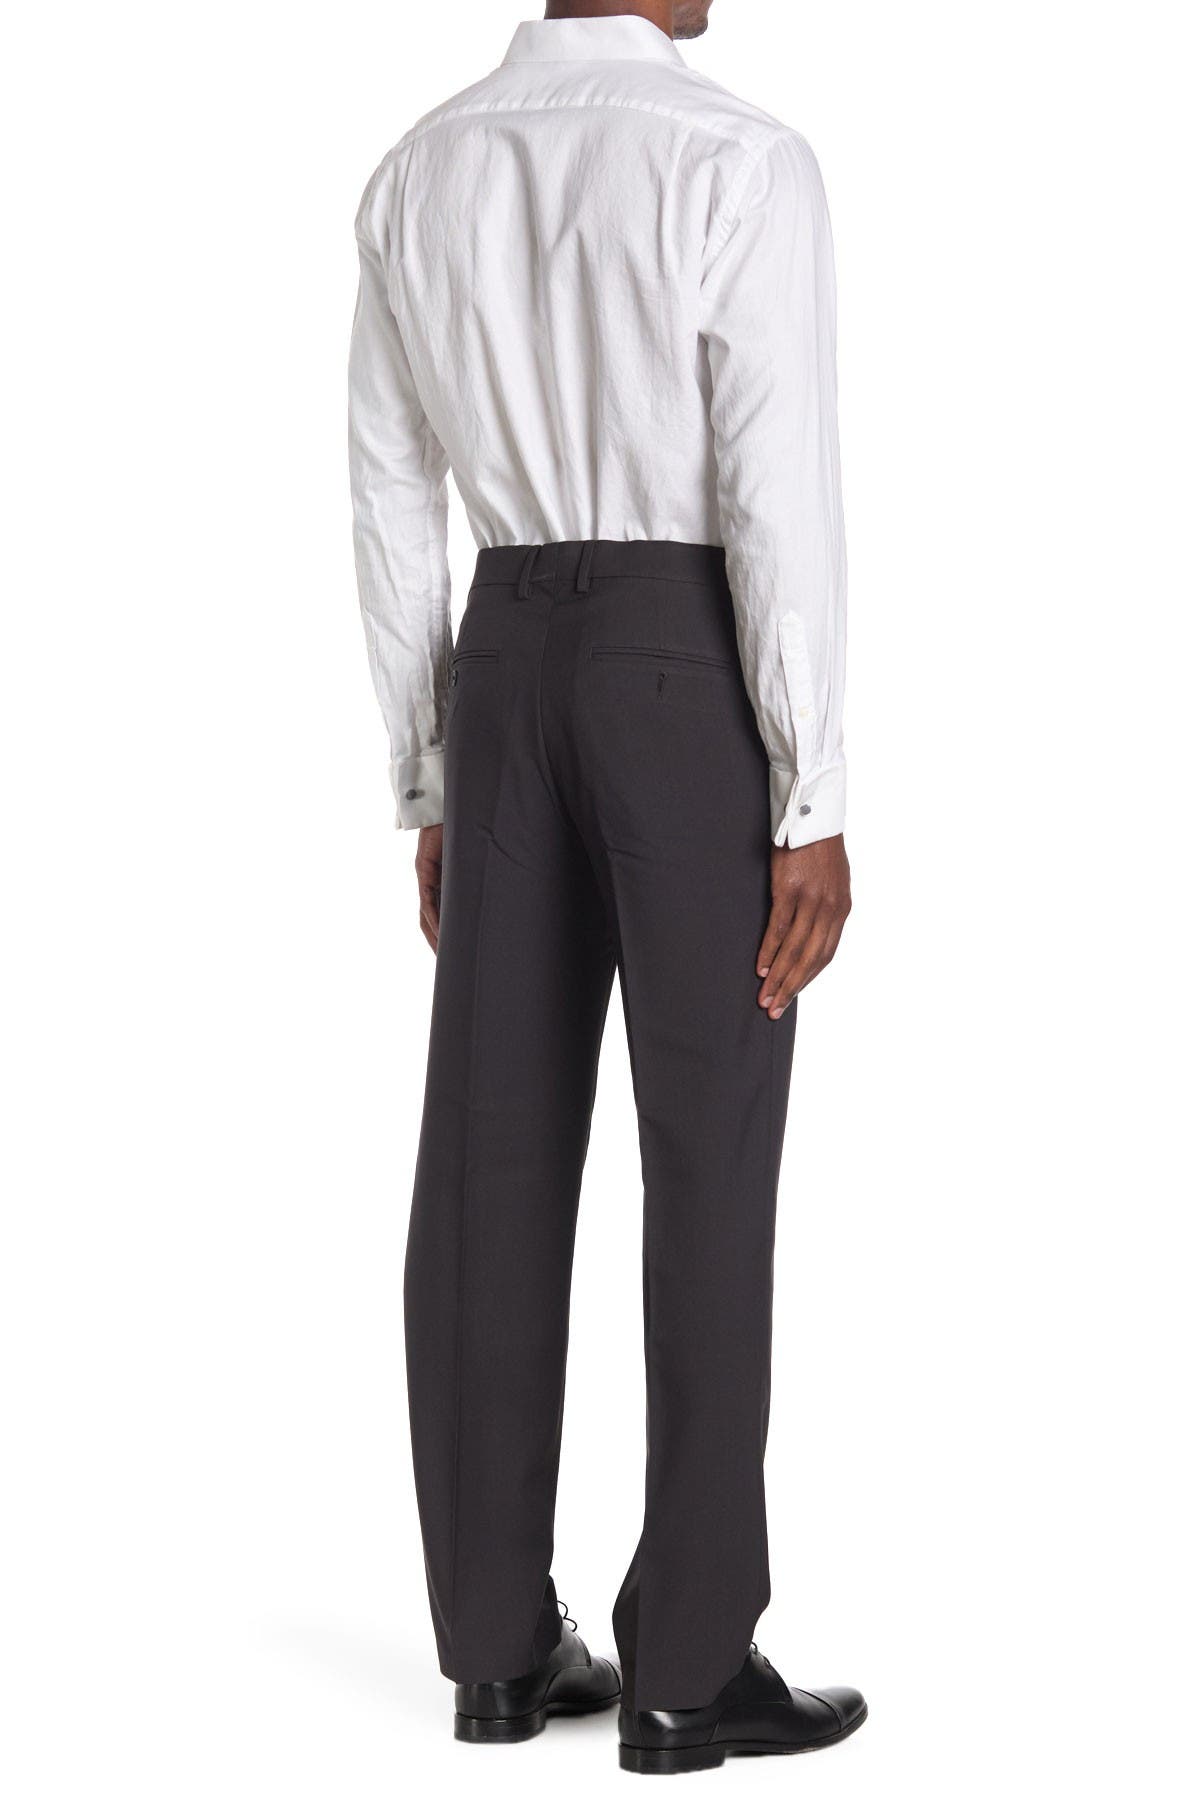 Haggar Comfort Stretch Straight Cut Pants In Oxford2